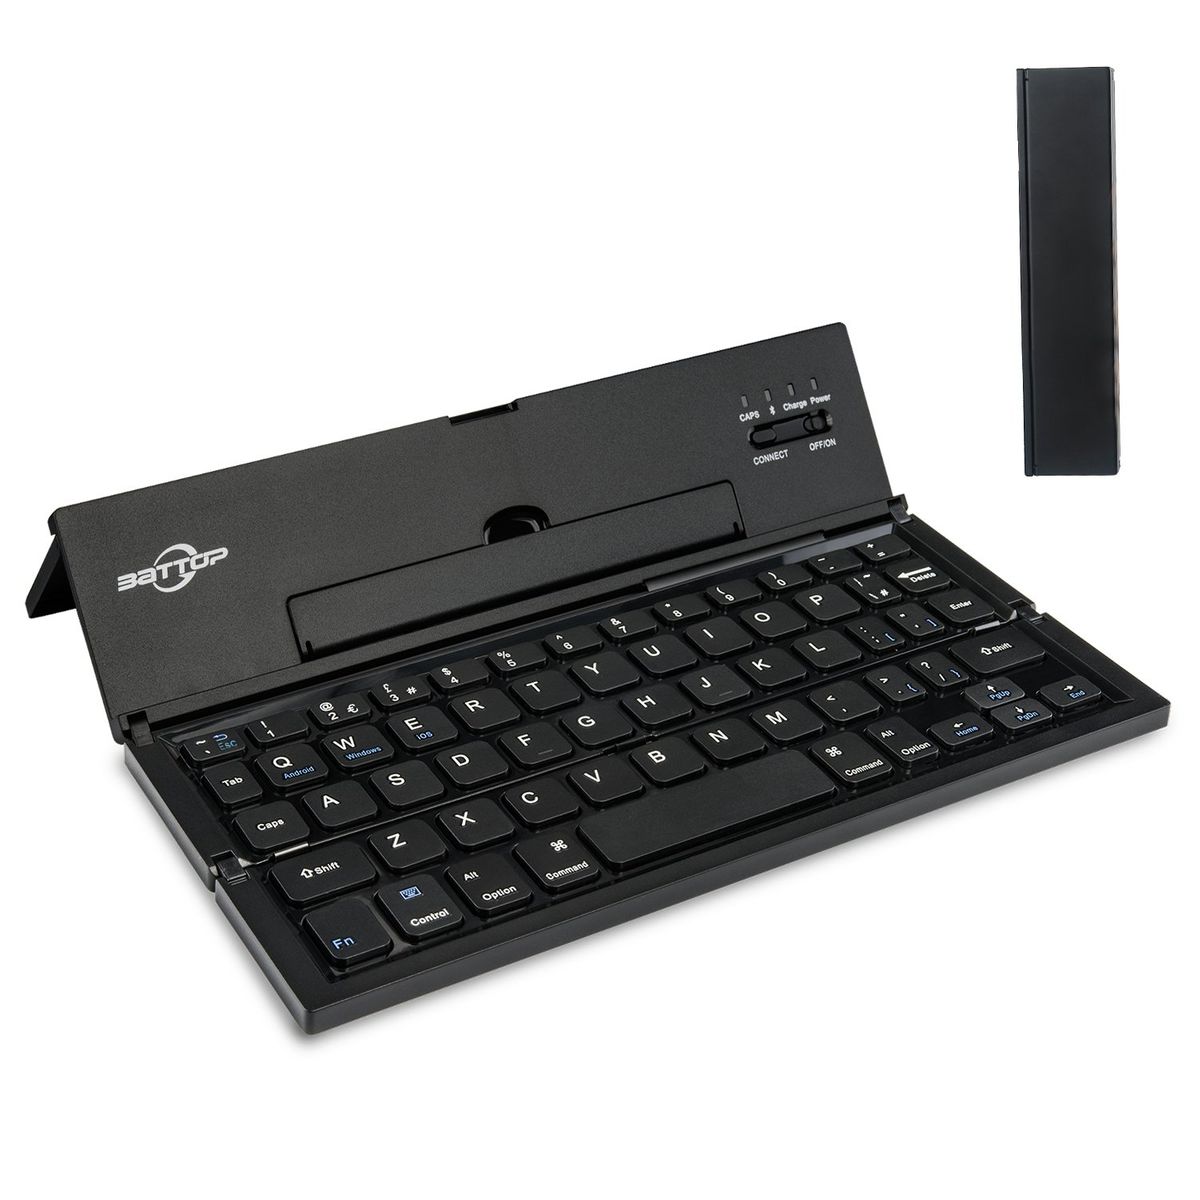 BATTOP Foldable Bluetooth Wireless Keyboard for iOS Windows Android Tablets & Smartphones u2013 Black